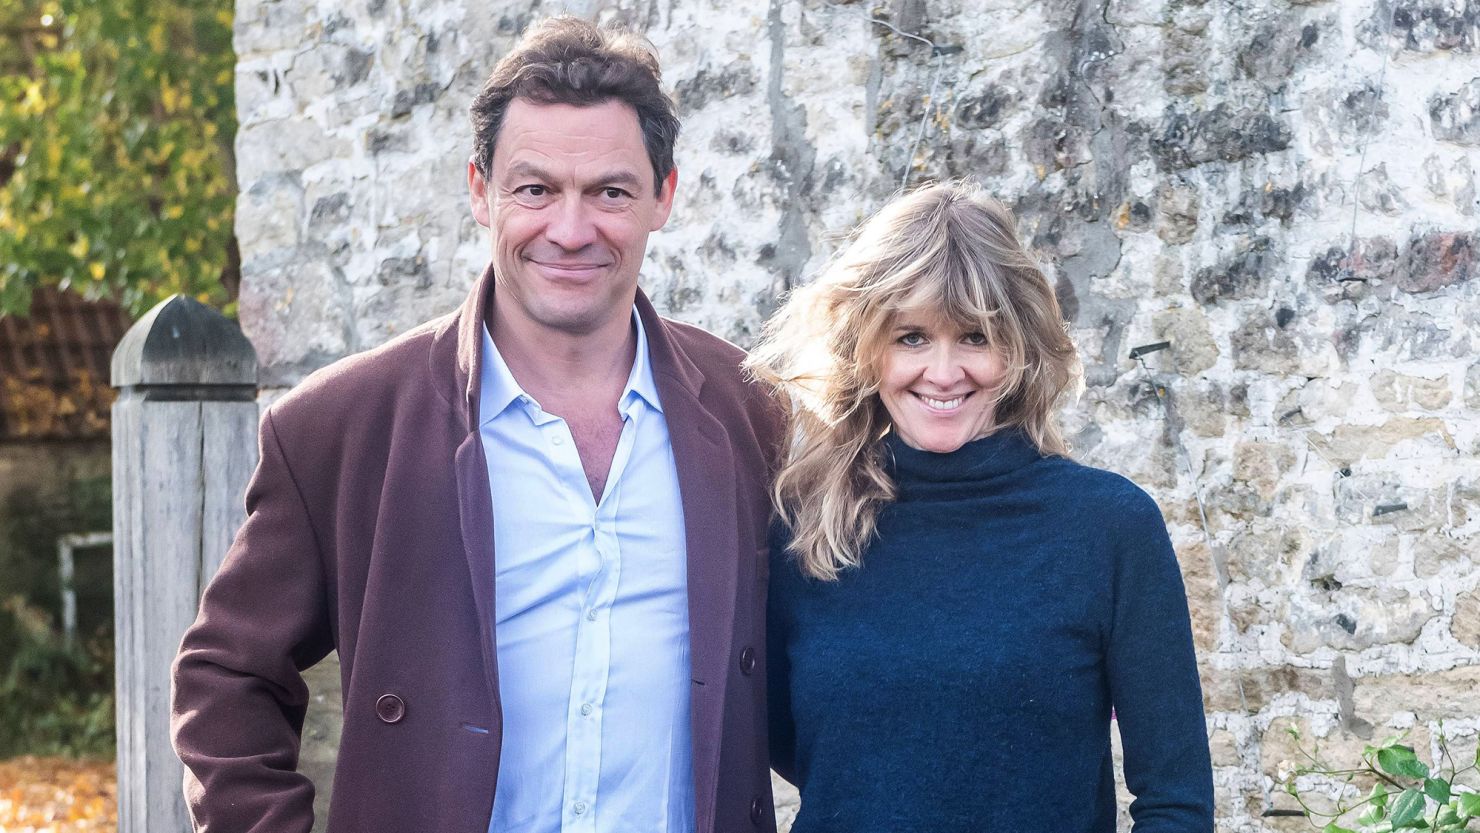 Dominic West and wife Catherine FitzGerald made a statement to the press following the scandal in October 2020.